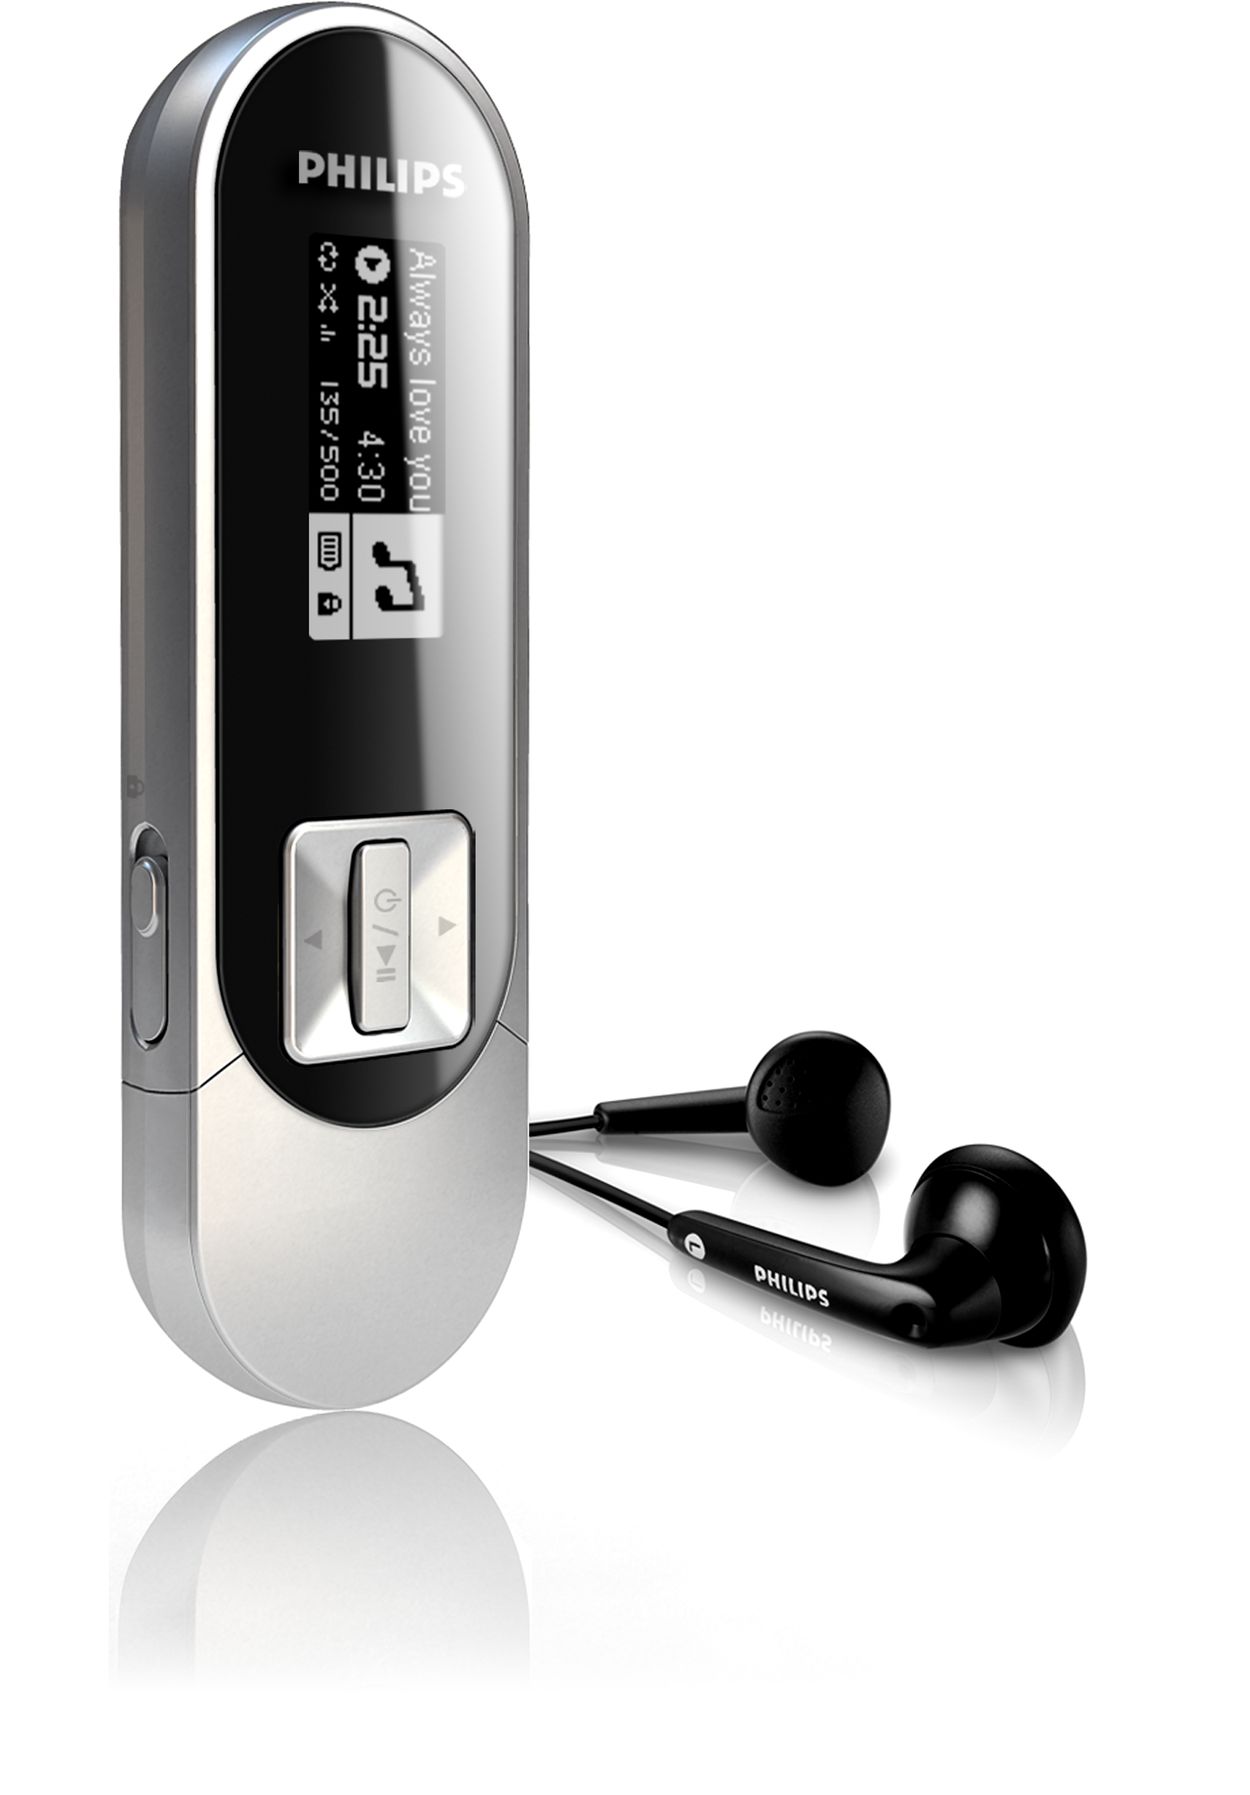 Philips gogear mp3 player drivers